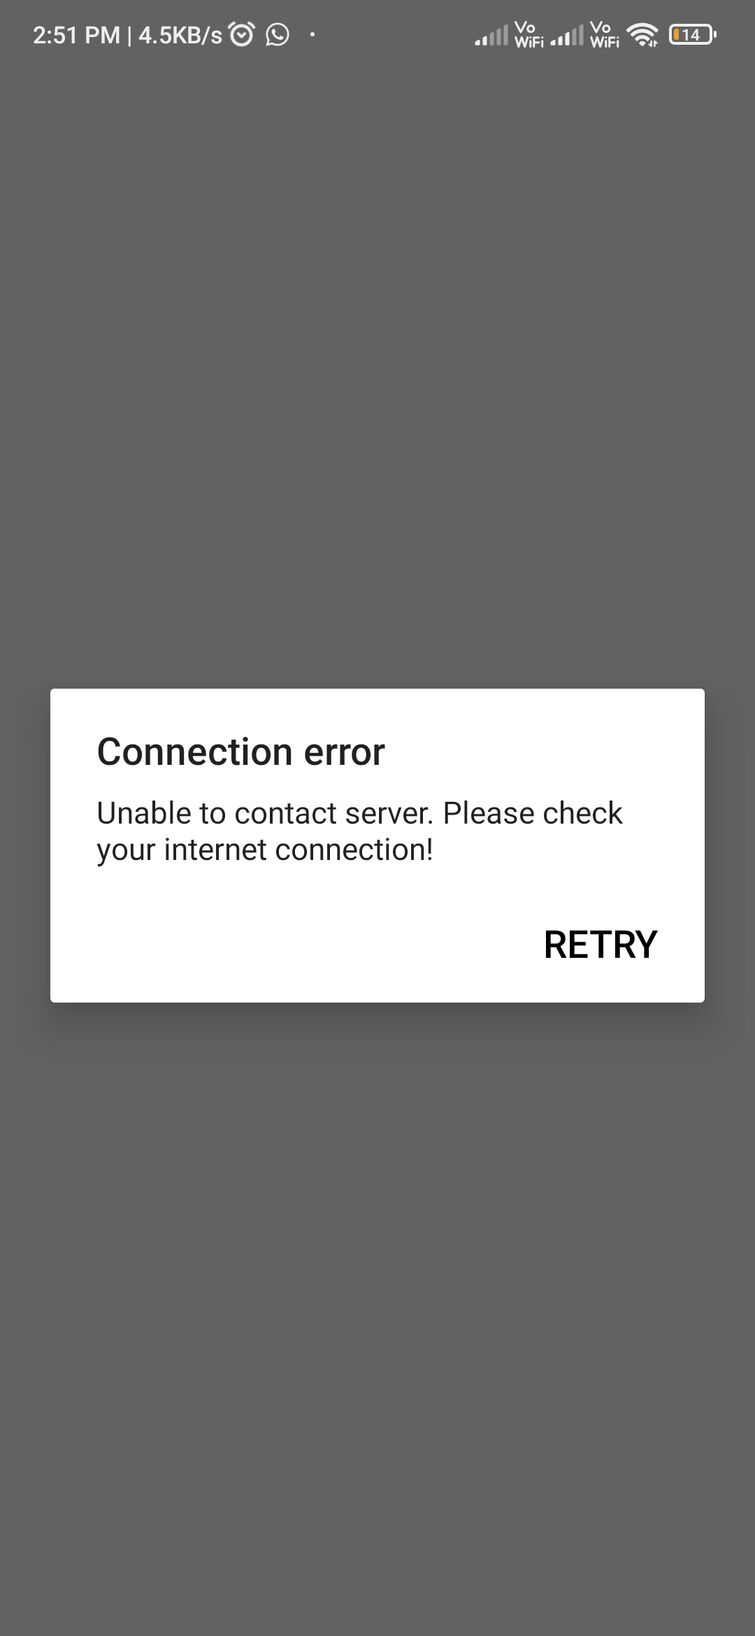 Is Roblox down? How to check Roblox server status